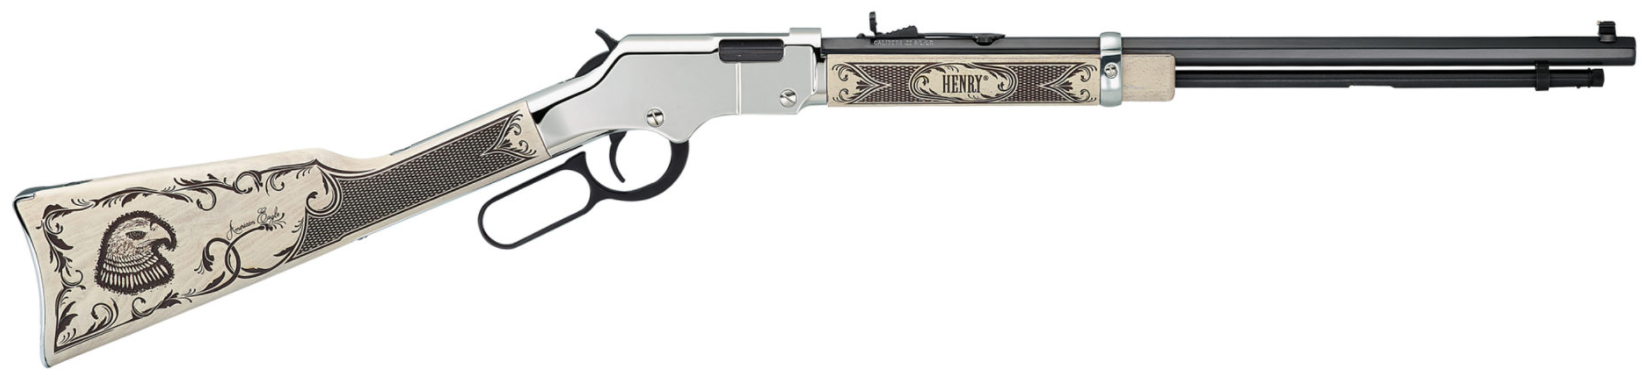 Henry Silver Series Rifles